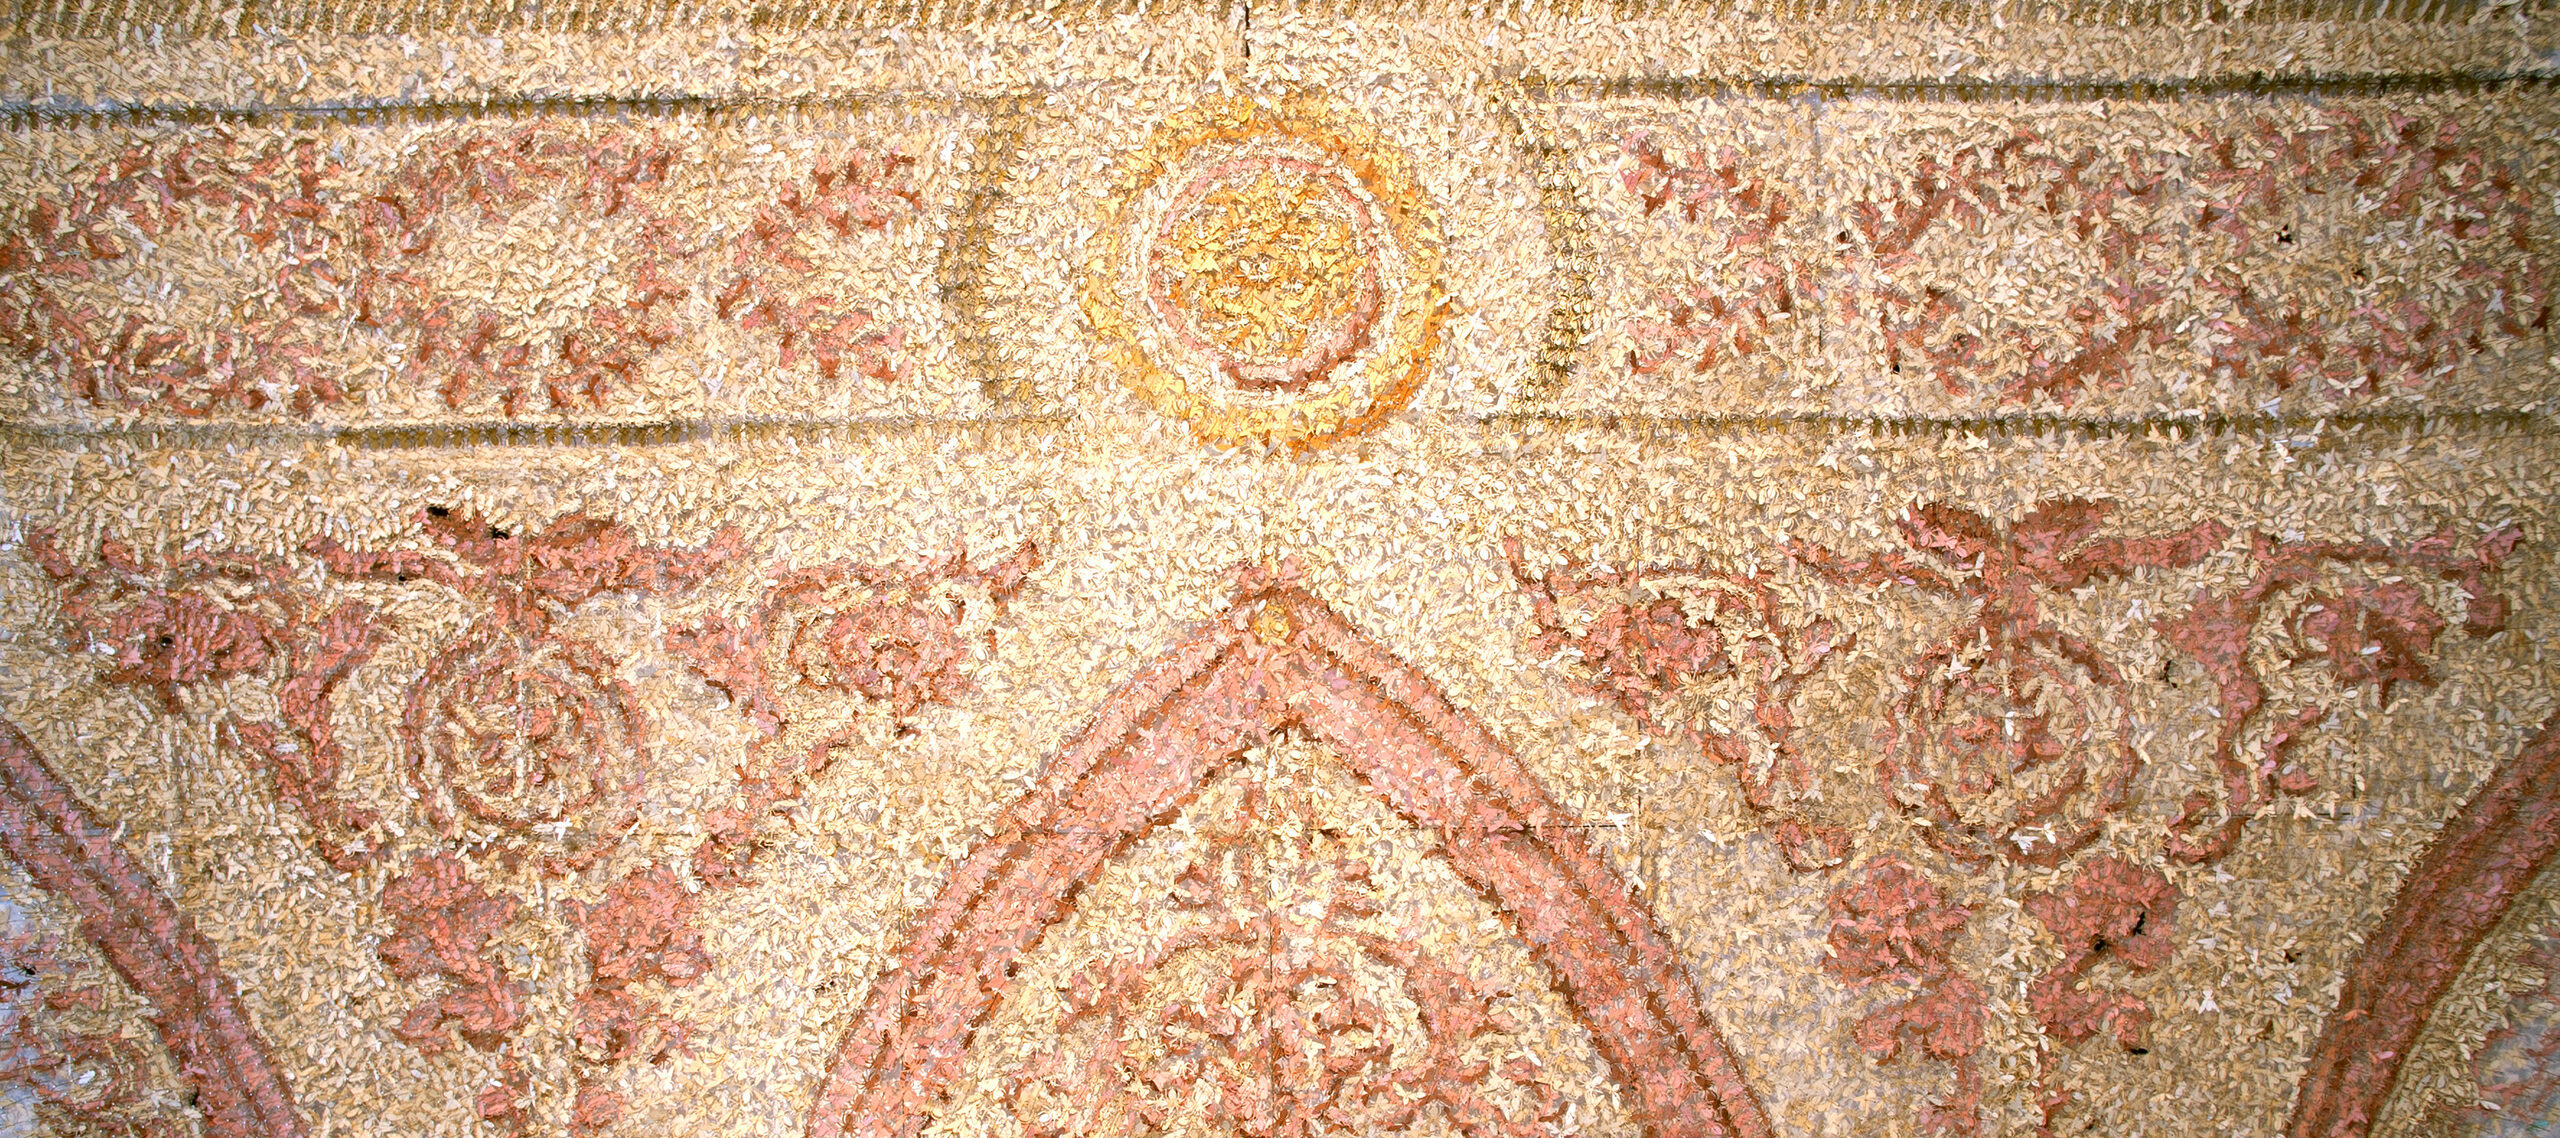 A colored image of what appears to be a wall decorated with mosaics in red and yellow tones. Upon closer inspection each shape is actually an origami bug.